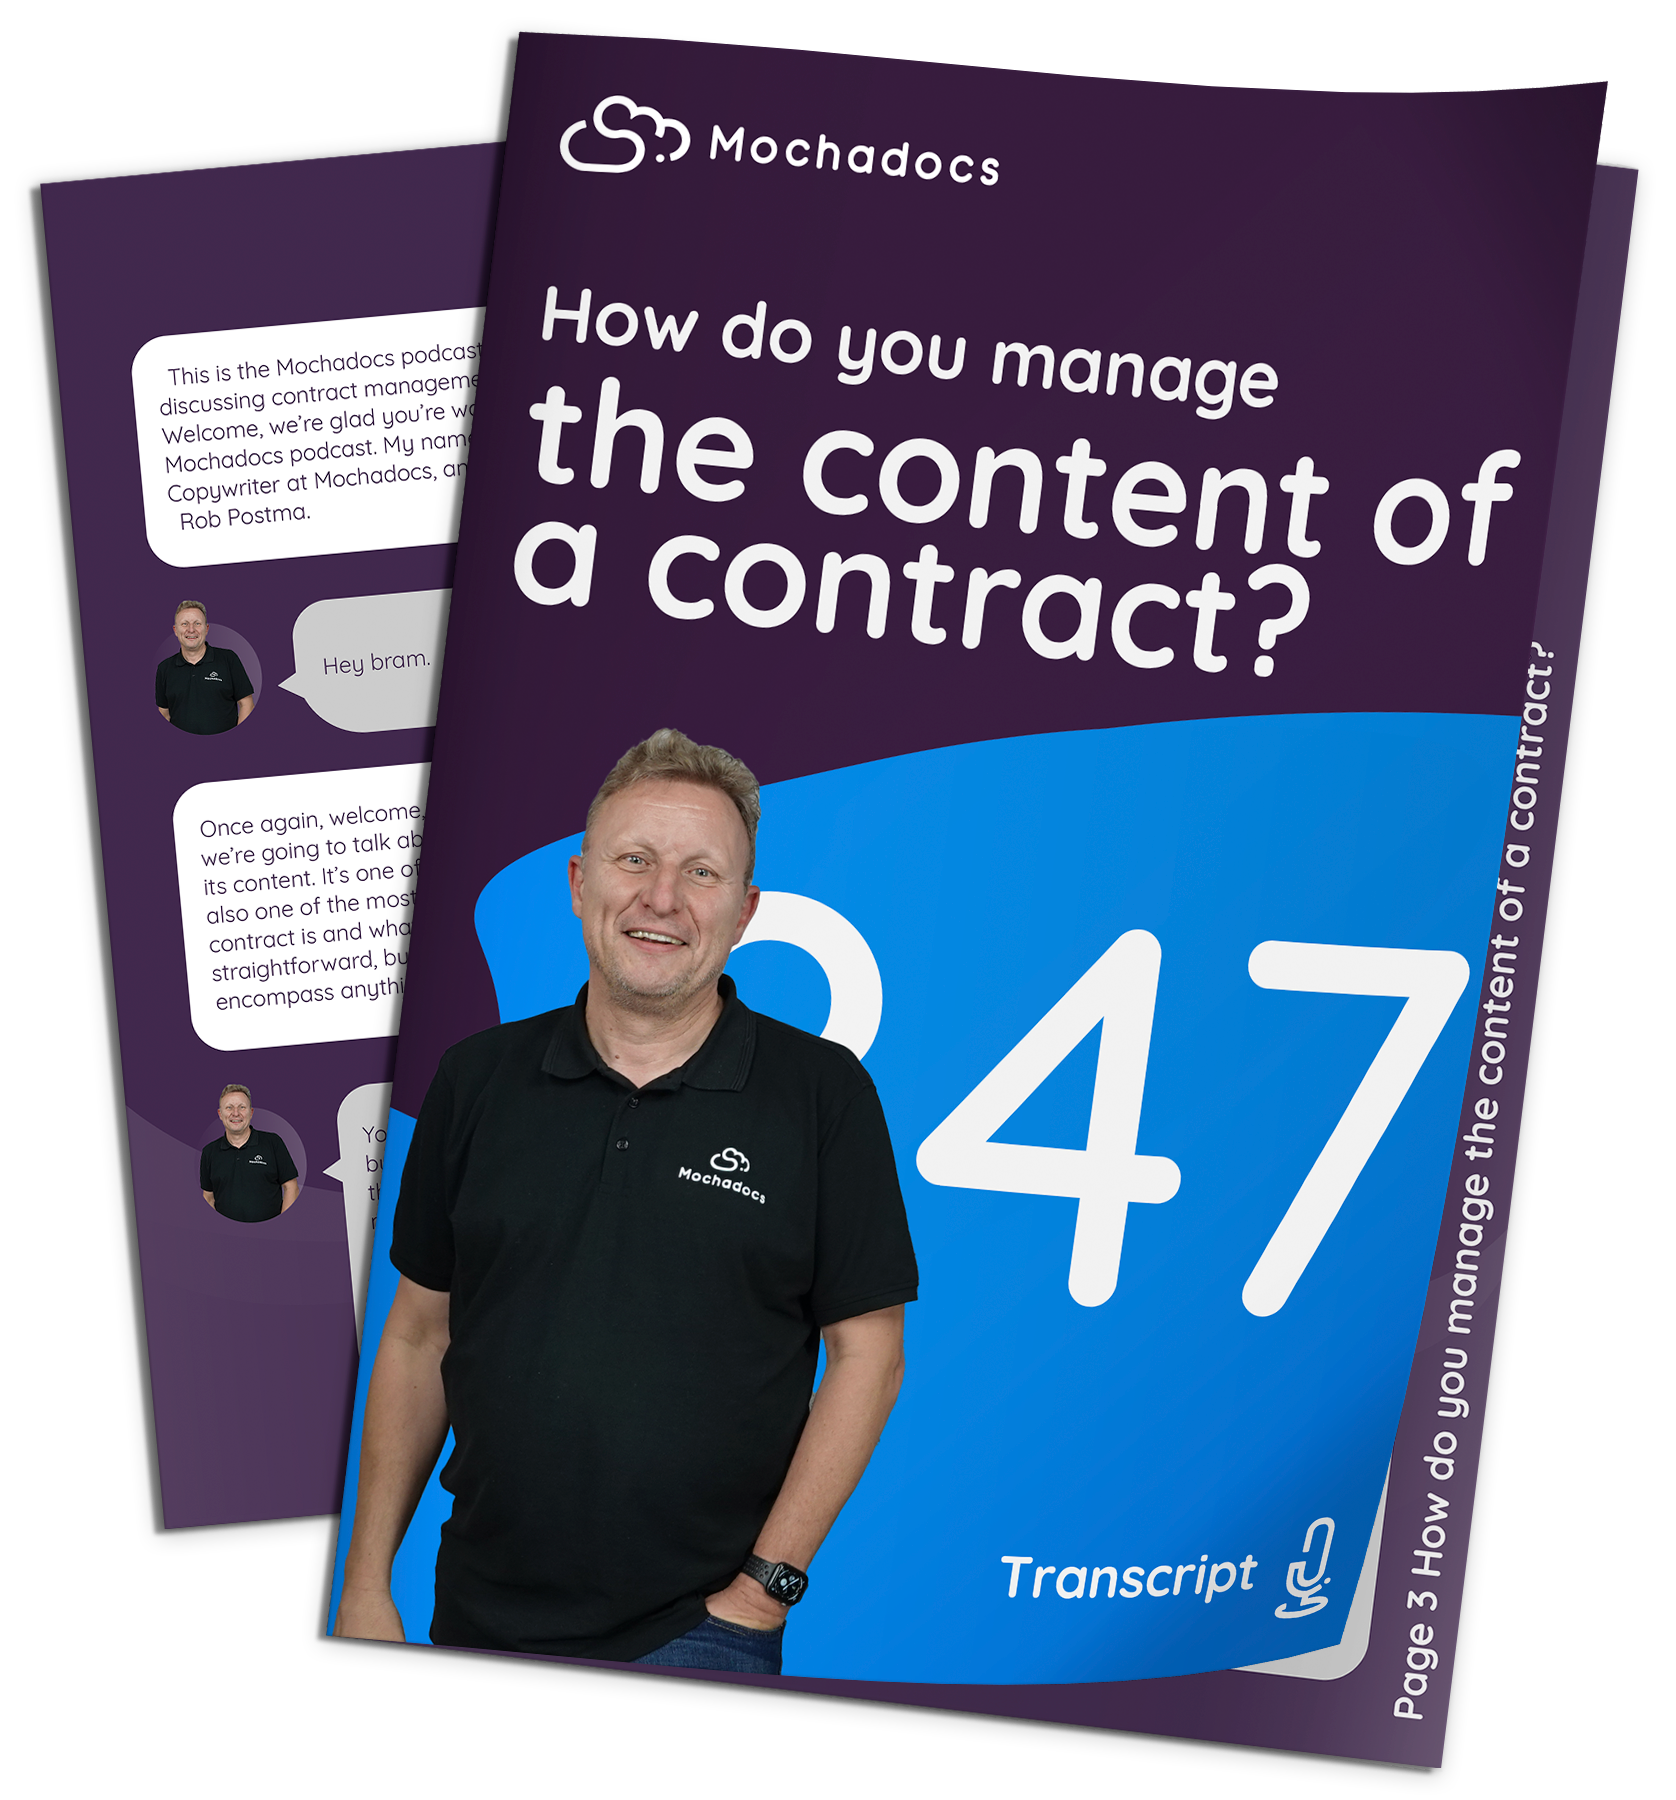 How do you manage the content of a contract